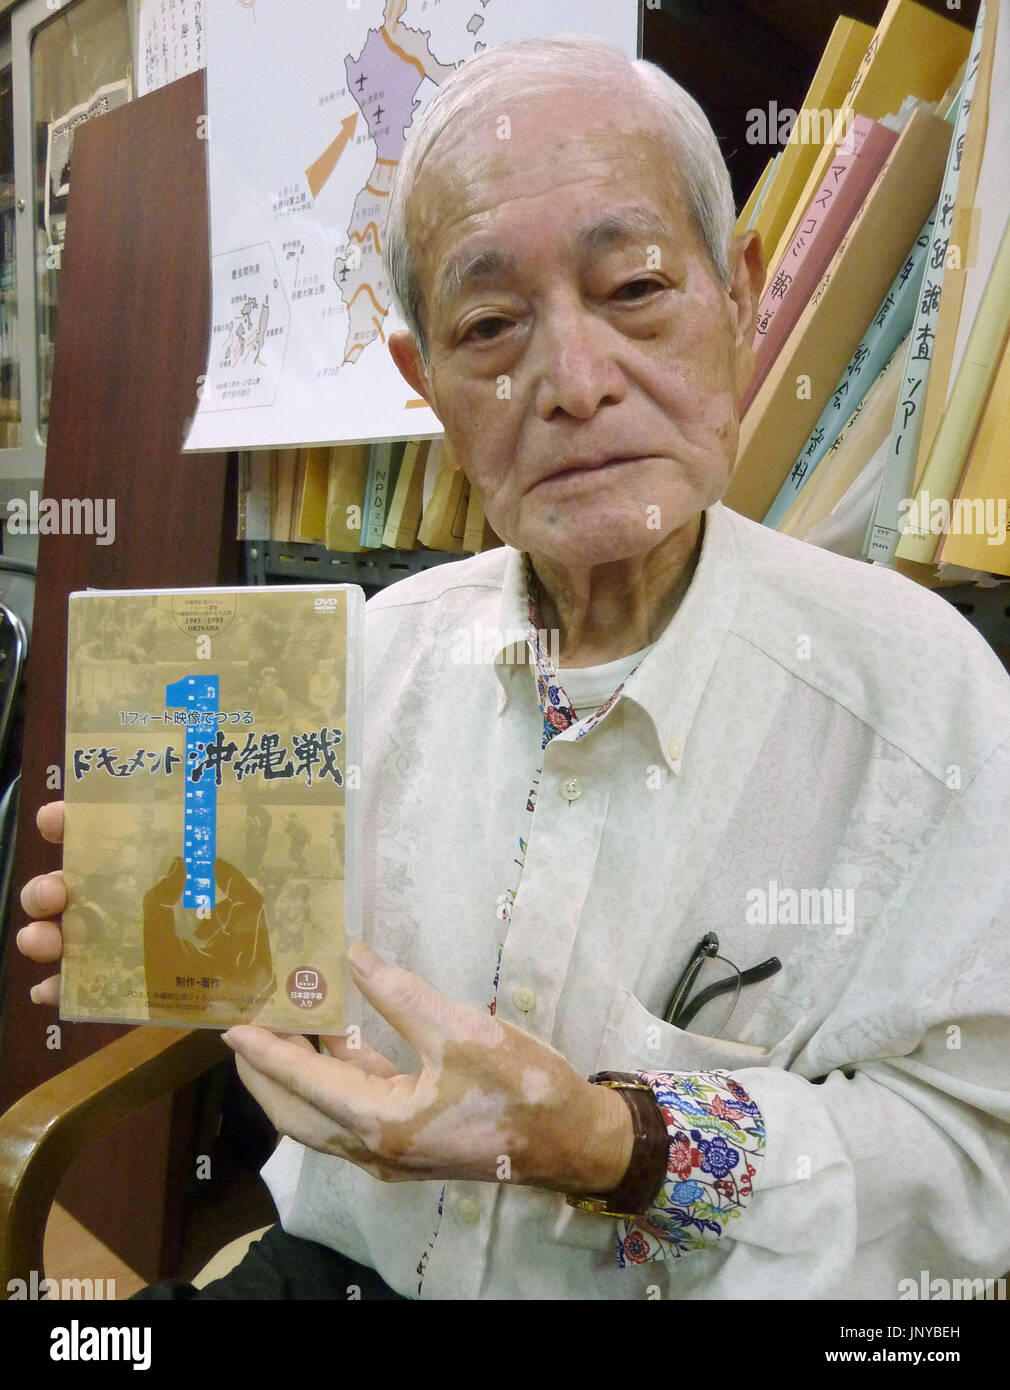 NAHA, Japan - Hiroaki Fukuchi, 81, leader of the Okinawa Historical Film Society, holds a 57-minute documentary on the 1945 Battle of Okinawa, in Naha, Okinawa Prefecture, in June 19, 2012. The civic group based in Naha recently reissued its documentary, originally released in 1995 as a video, in DVD format ahead of the 67th anniversary June 23 marking the end of the battle. (Kyodo) Stock Photo